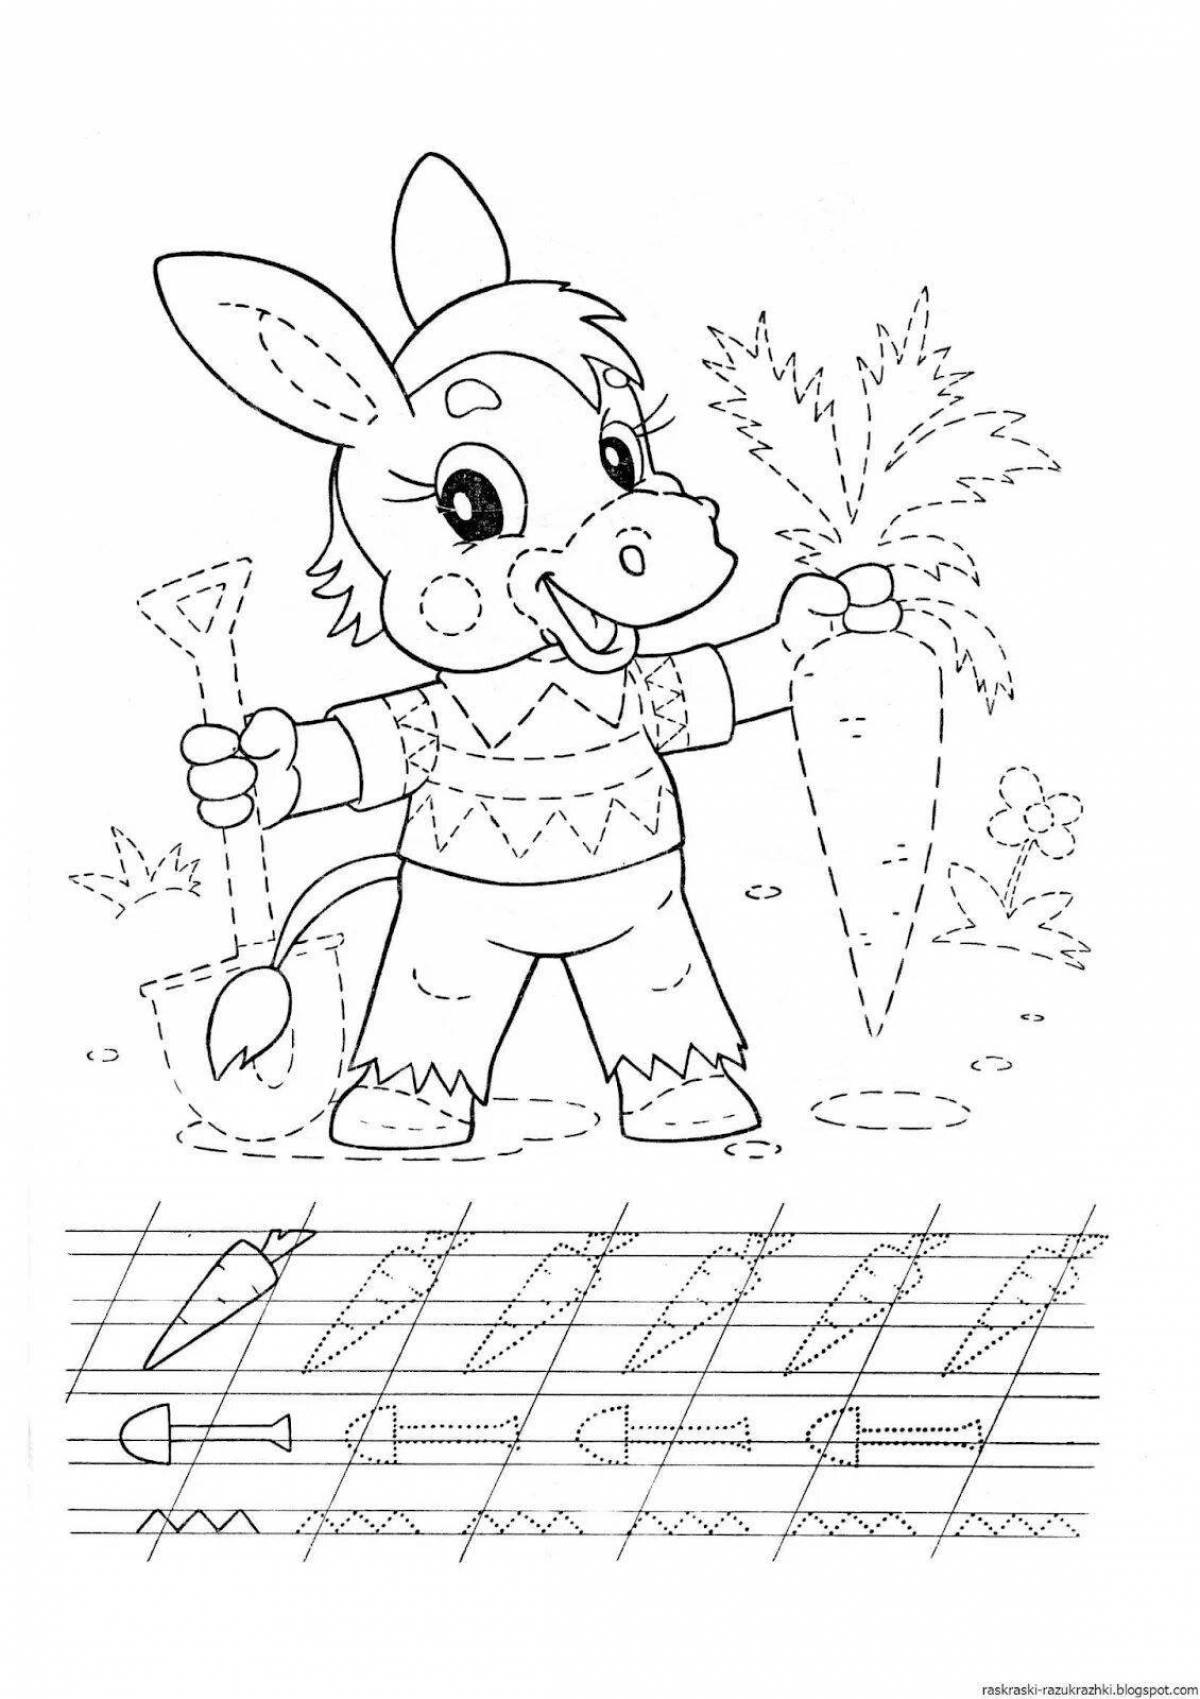 Colored Recipe Coloring Page for Kids